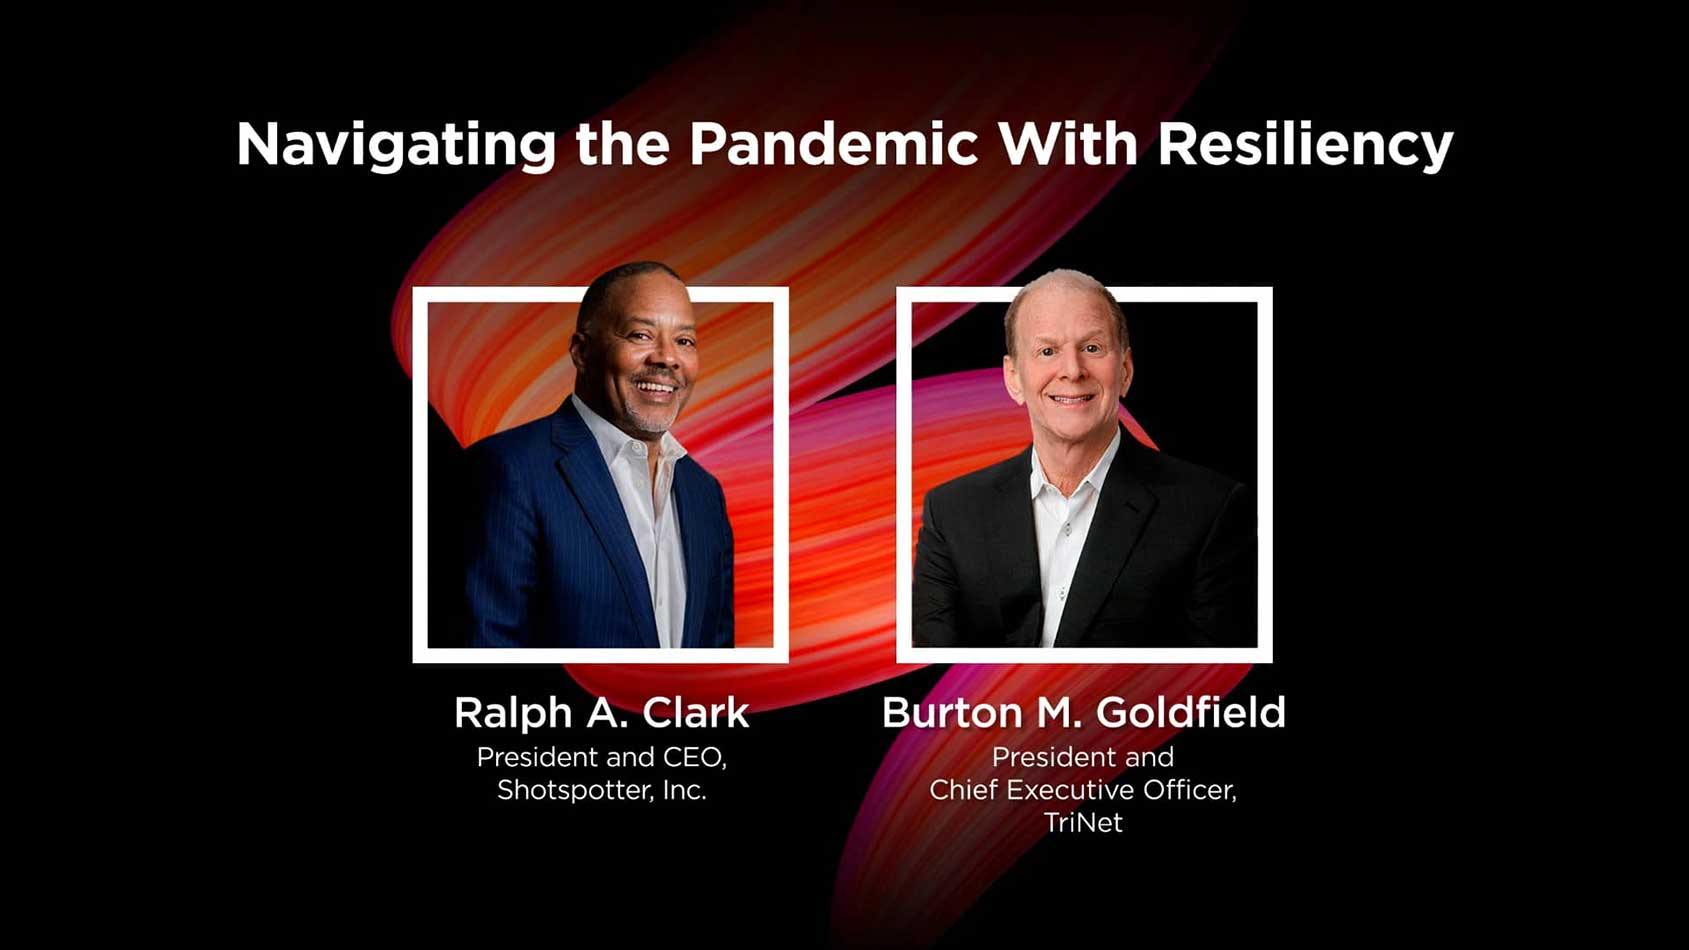 Navigating the Pandemic With Resiliency